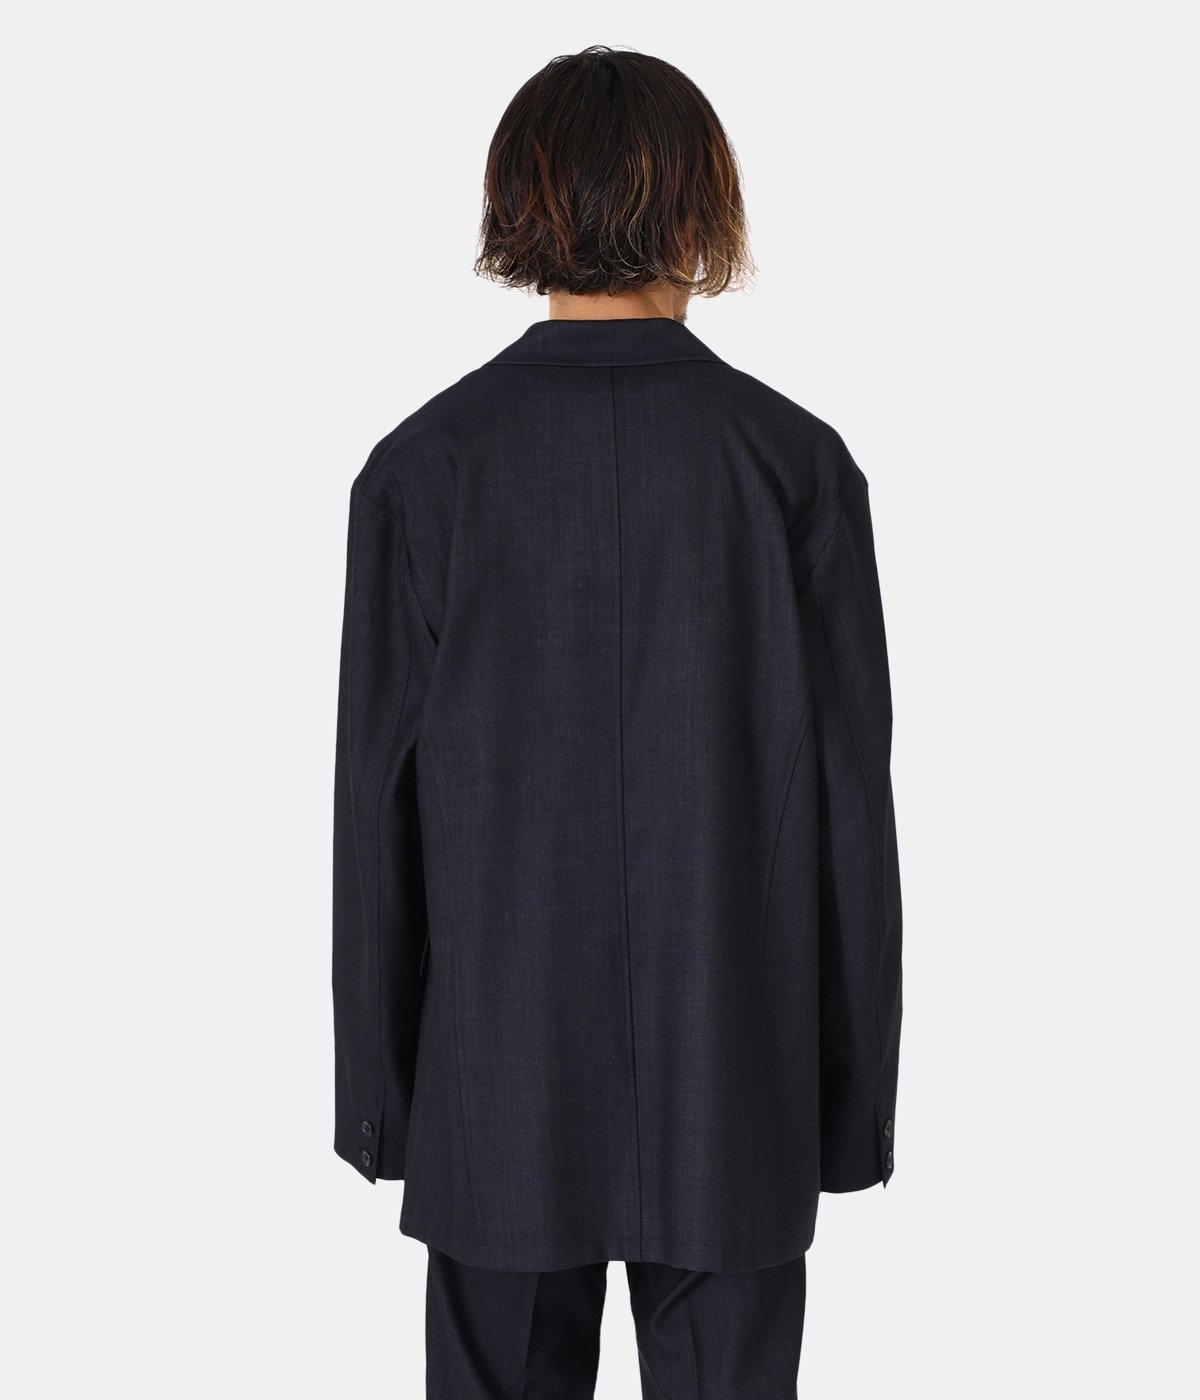 Wool Denim Chambray 2B Jacket | PORT BY ARK(ポートバイアーク